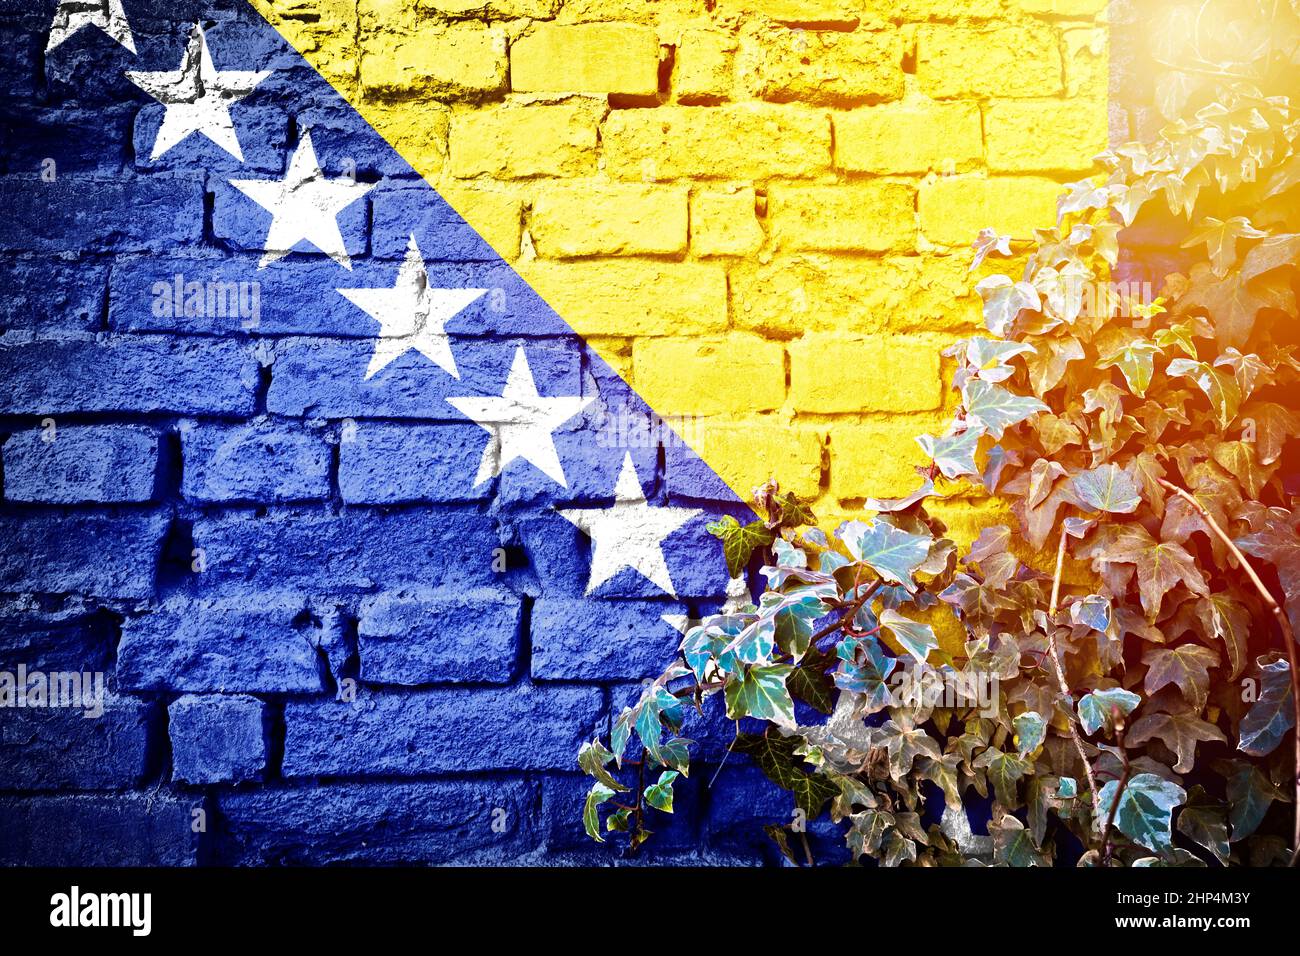 Bosnia And Herzegovina grunge flag on brick wall with ivy plantsun haze view, country symbol concept Stock Photo